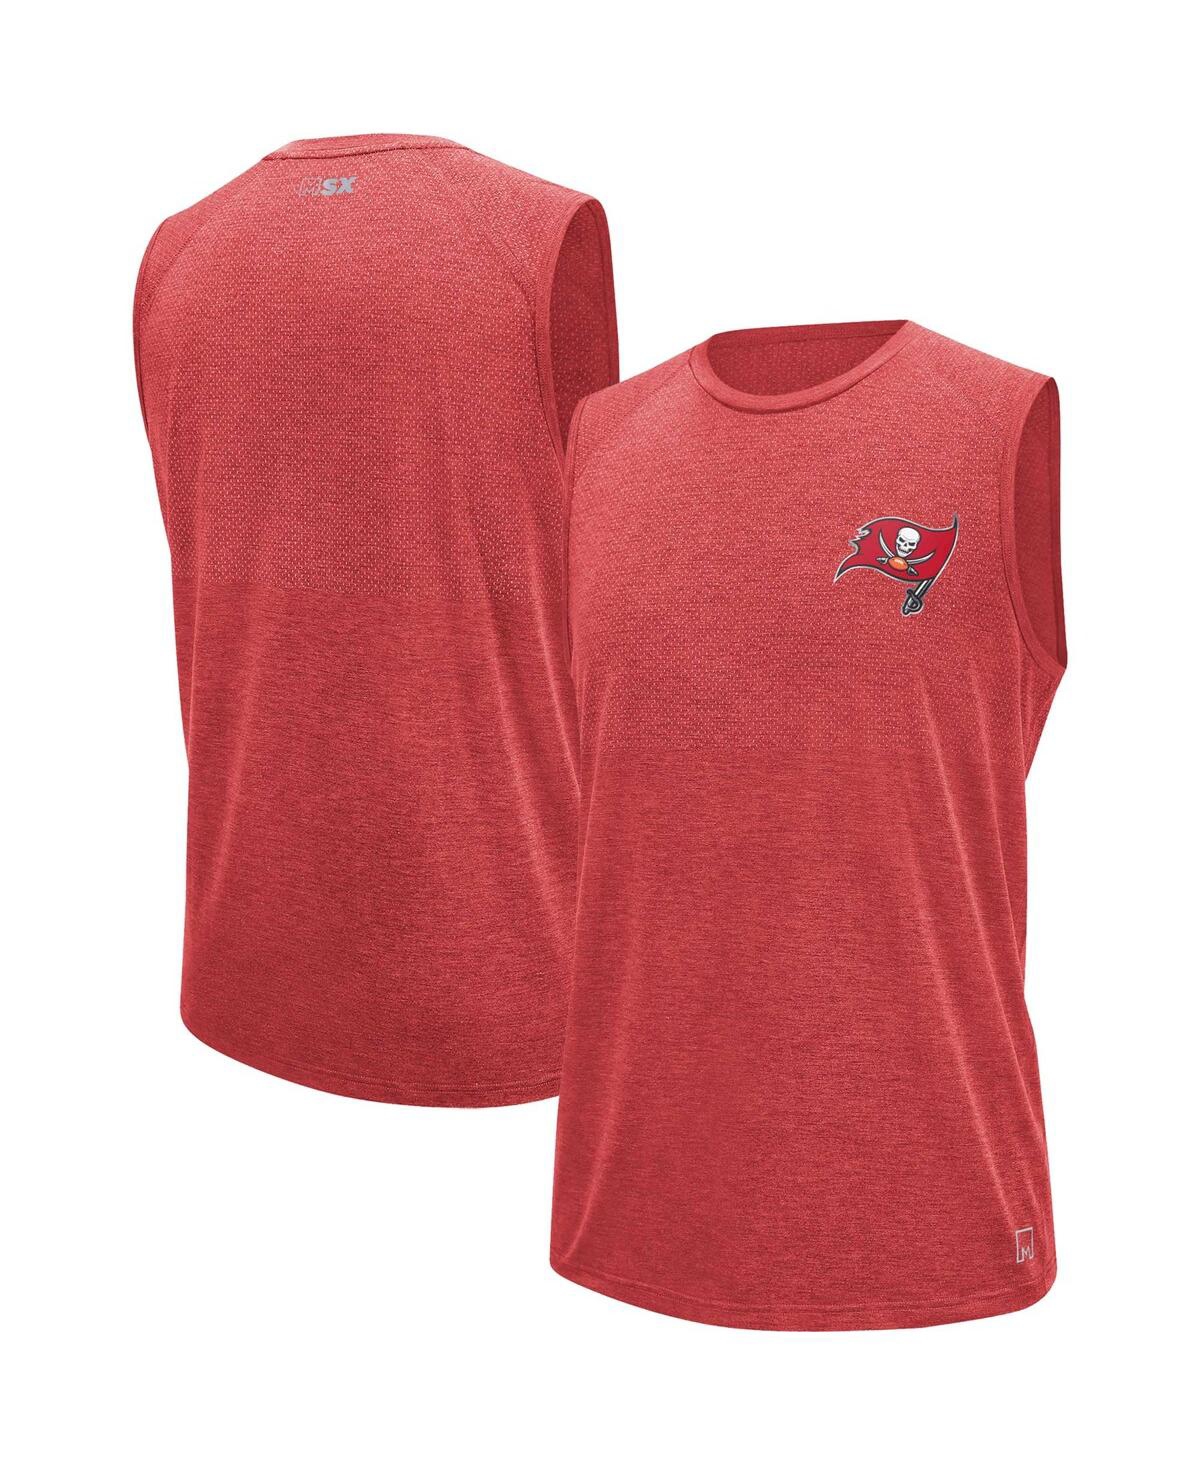 Msx By Michael Strahan Men's  Red Tampa Bay Buccaneers Warm Up Sleeveless T-shirt